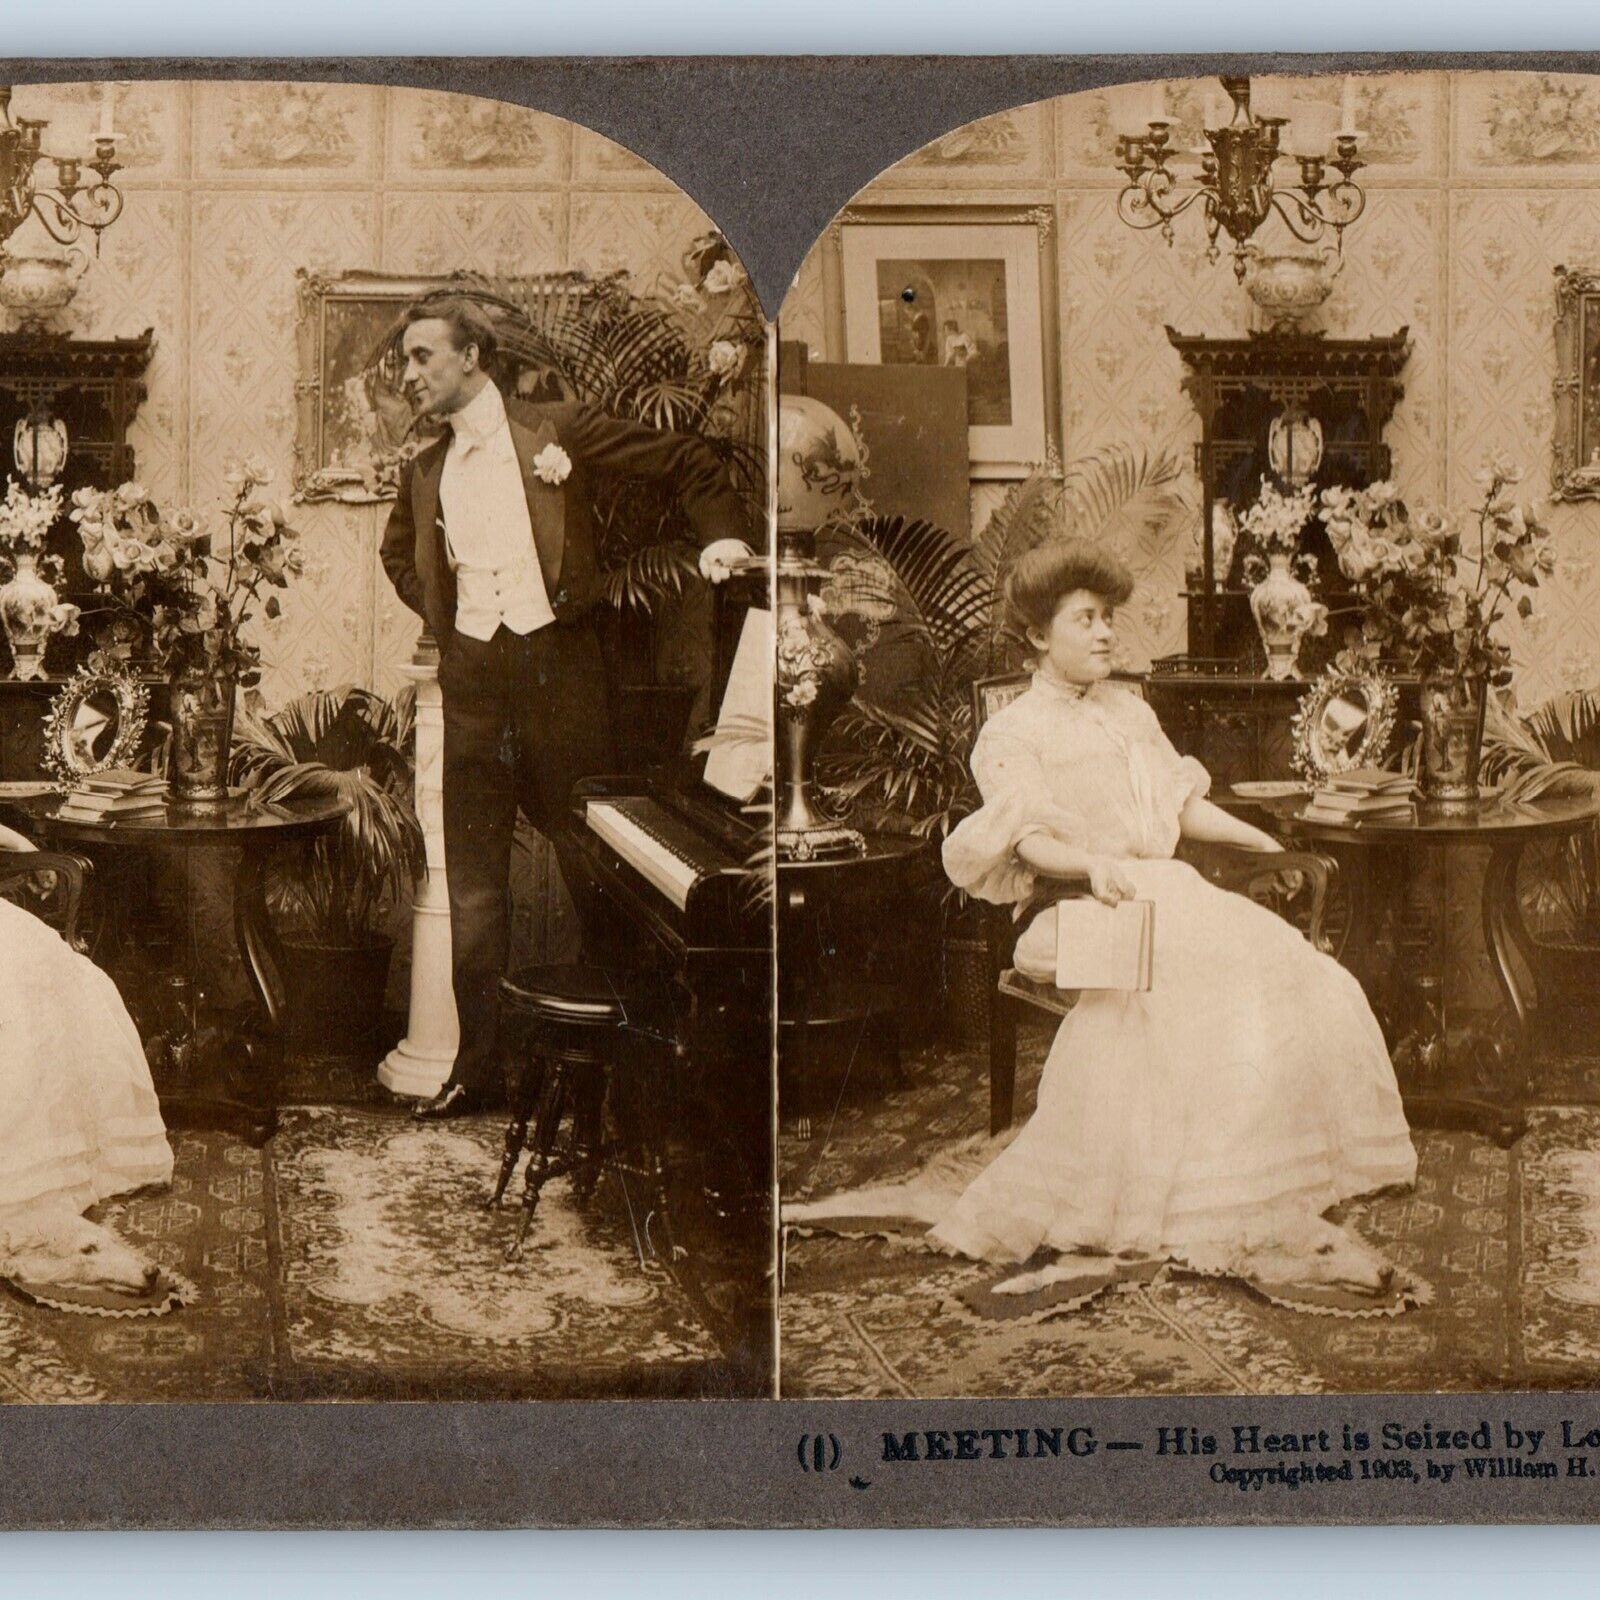 1903 Man Meeting Woman Pompadour Fancy House Interior Stereoview Real Photo V32